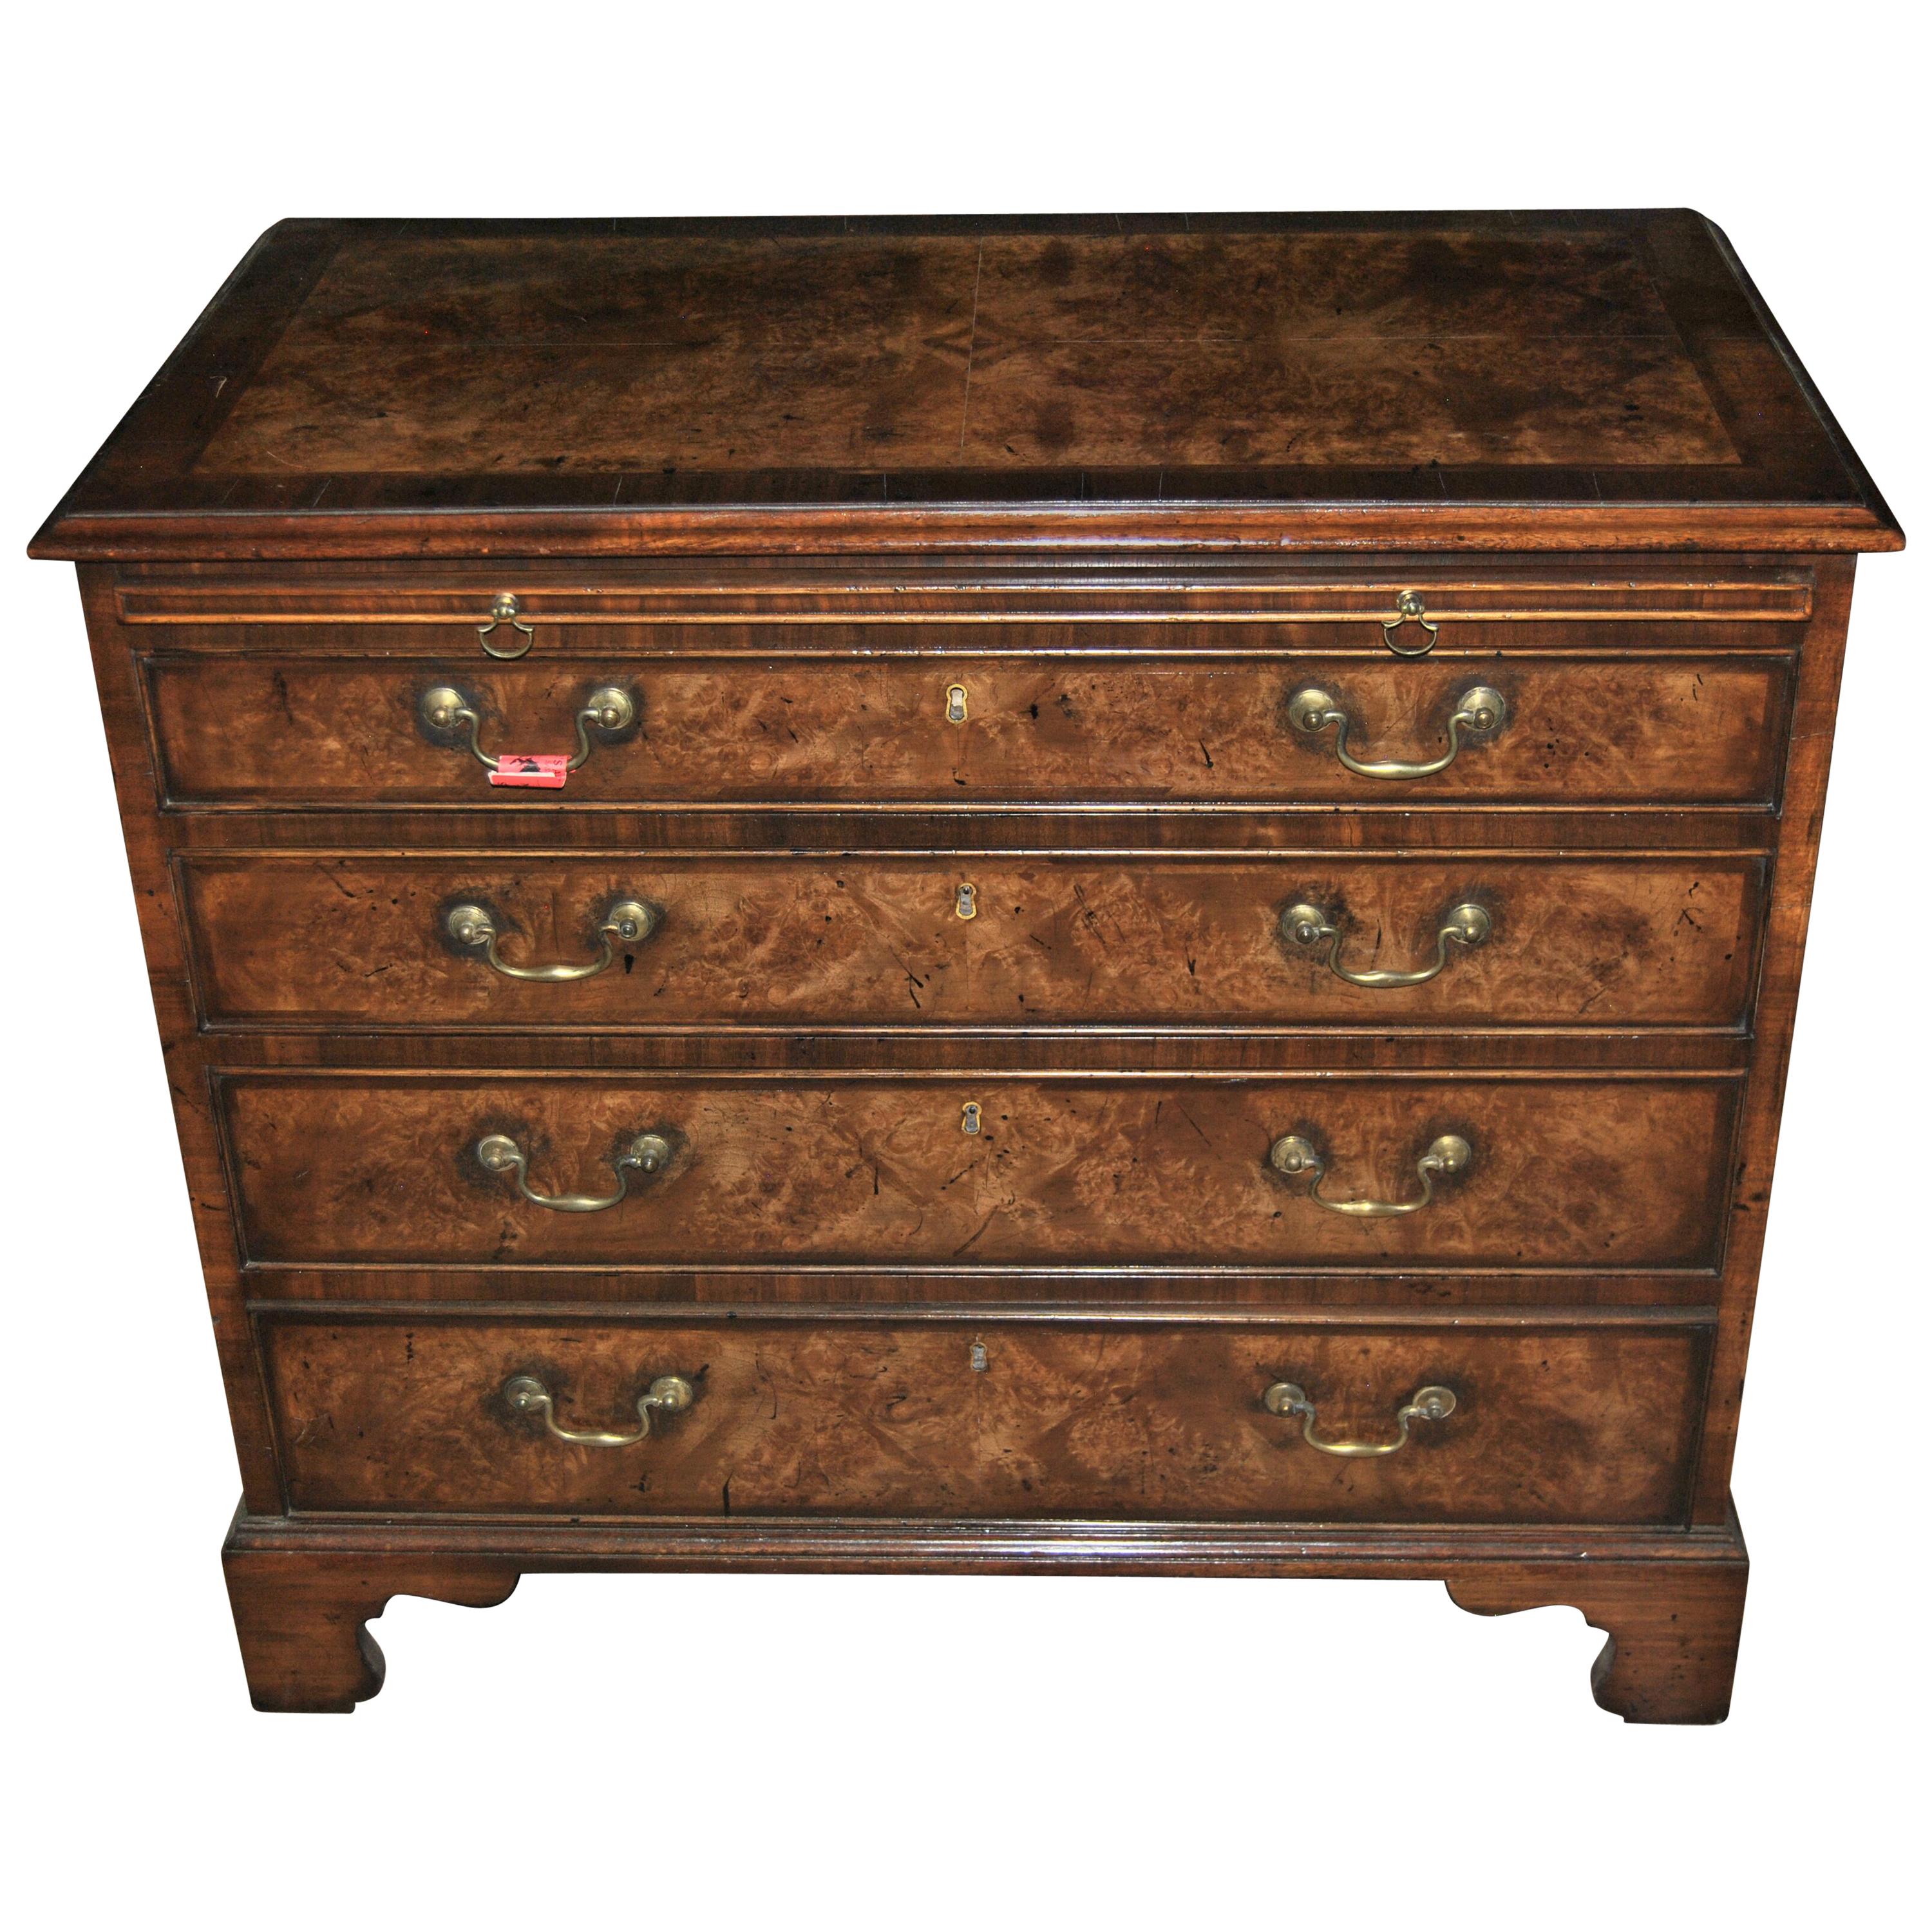 Early 19th Century Walnut Chest of Drawers